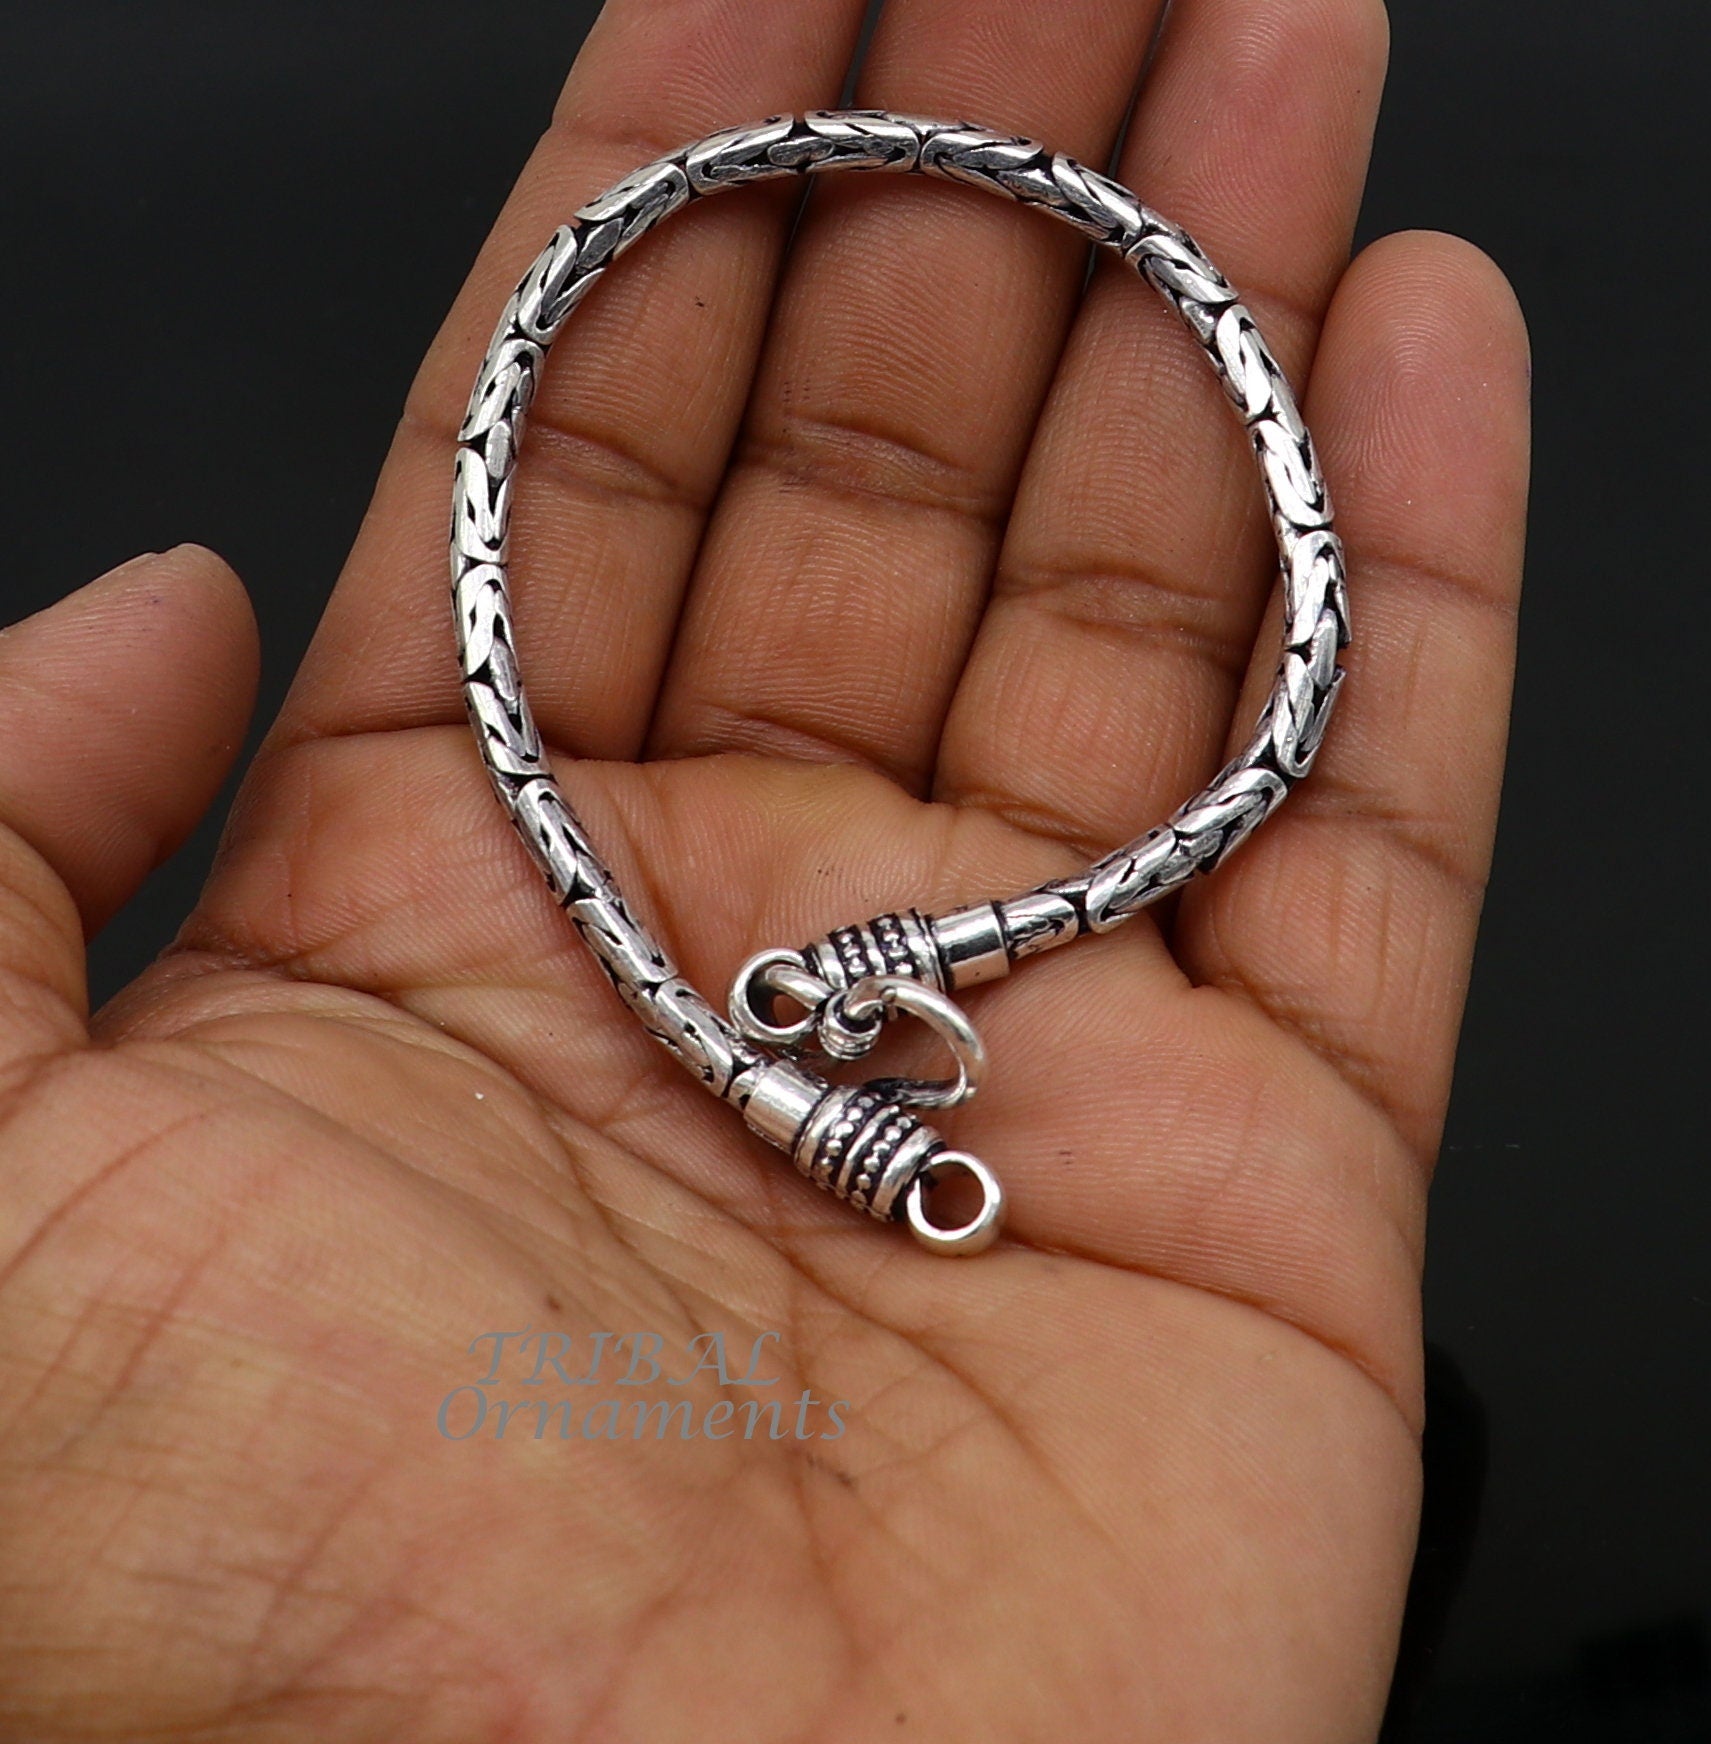 3.5mm 6.5" to 8.5" Unique byzantine design 925 Sterling silver handmade chain bracelet flexible bracelet unisex jewelry from India  sbr429 - TRIBAL ORNAMENTS